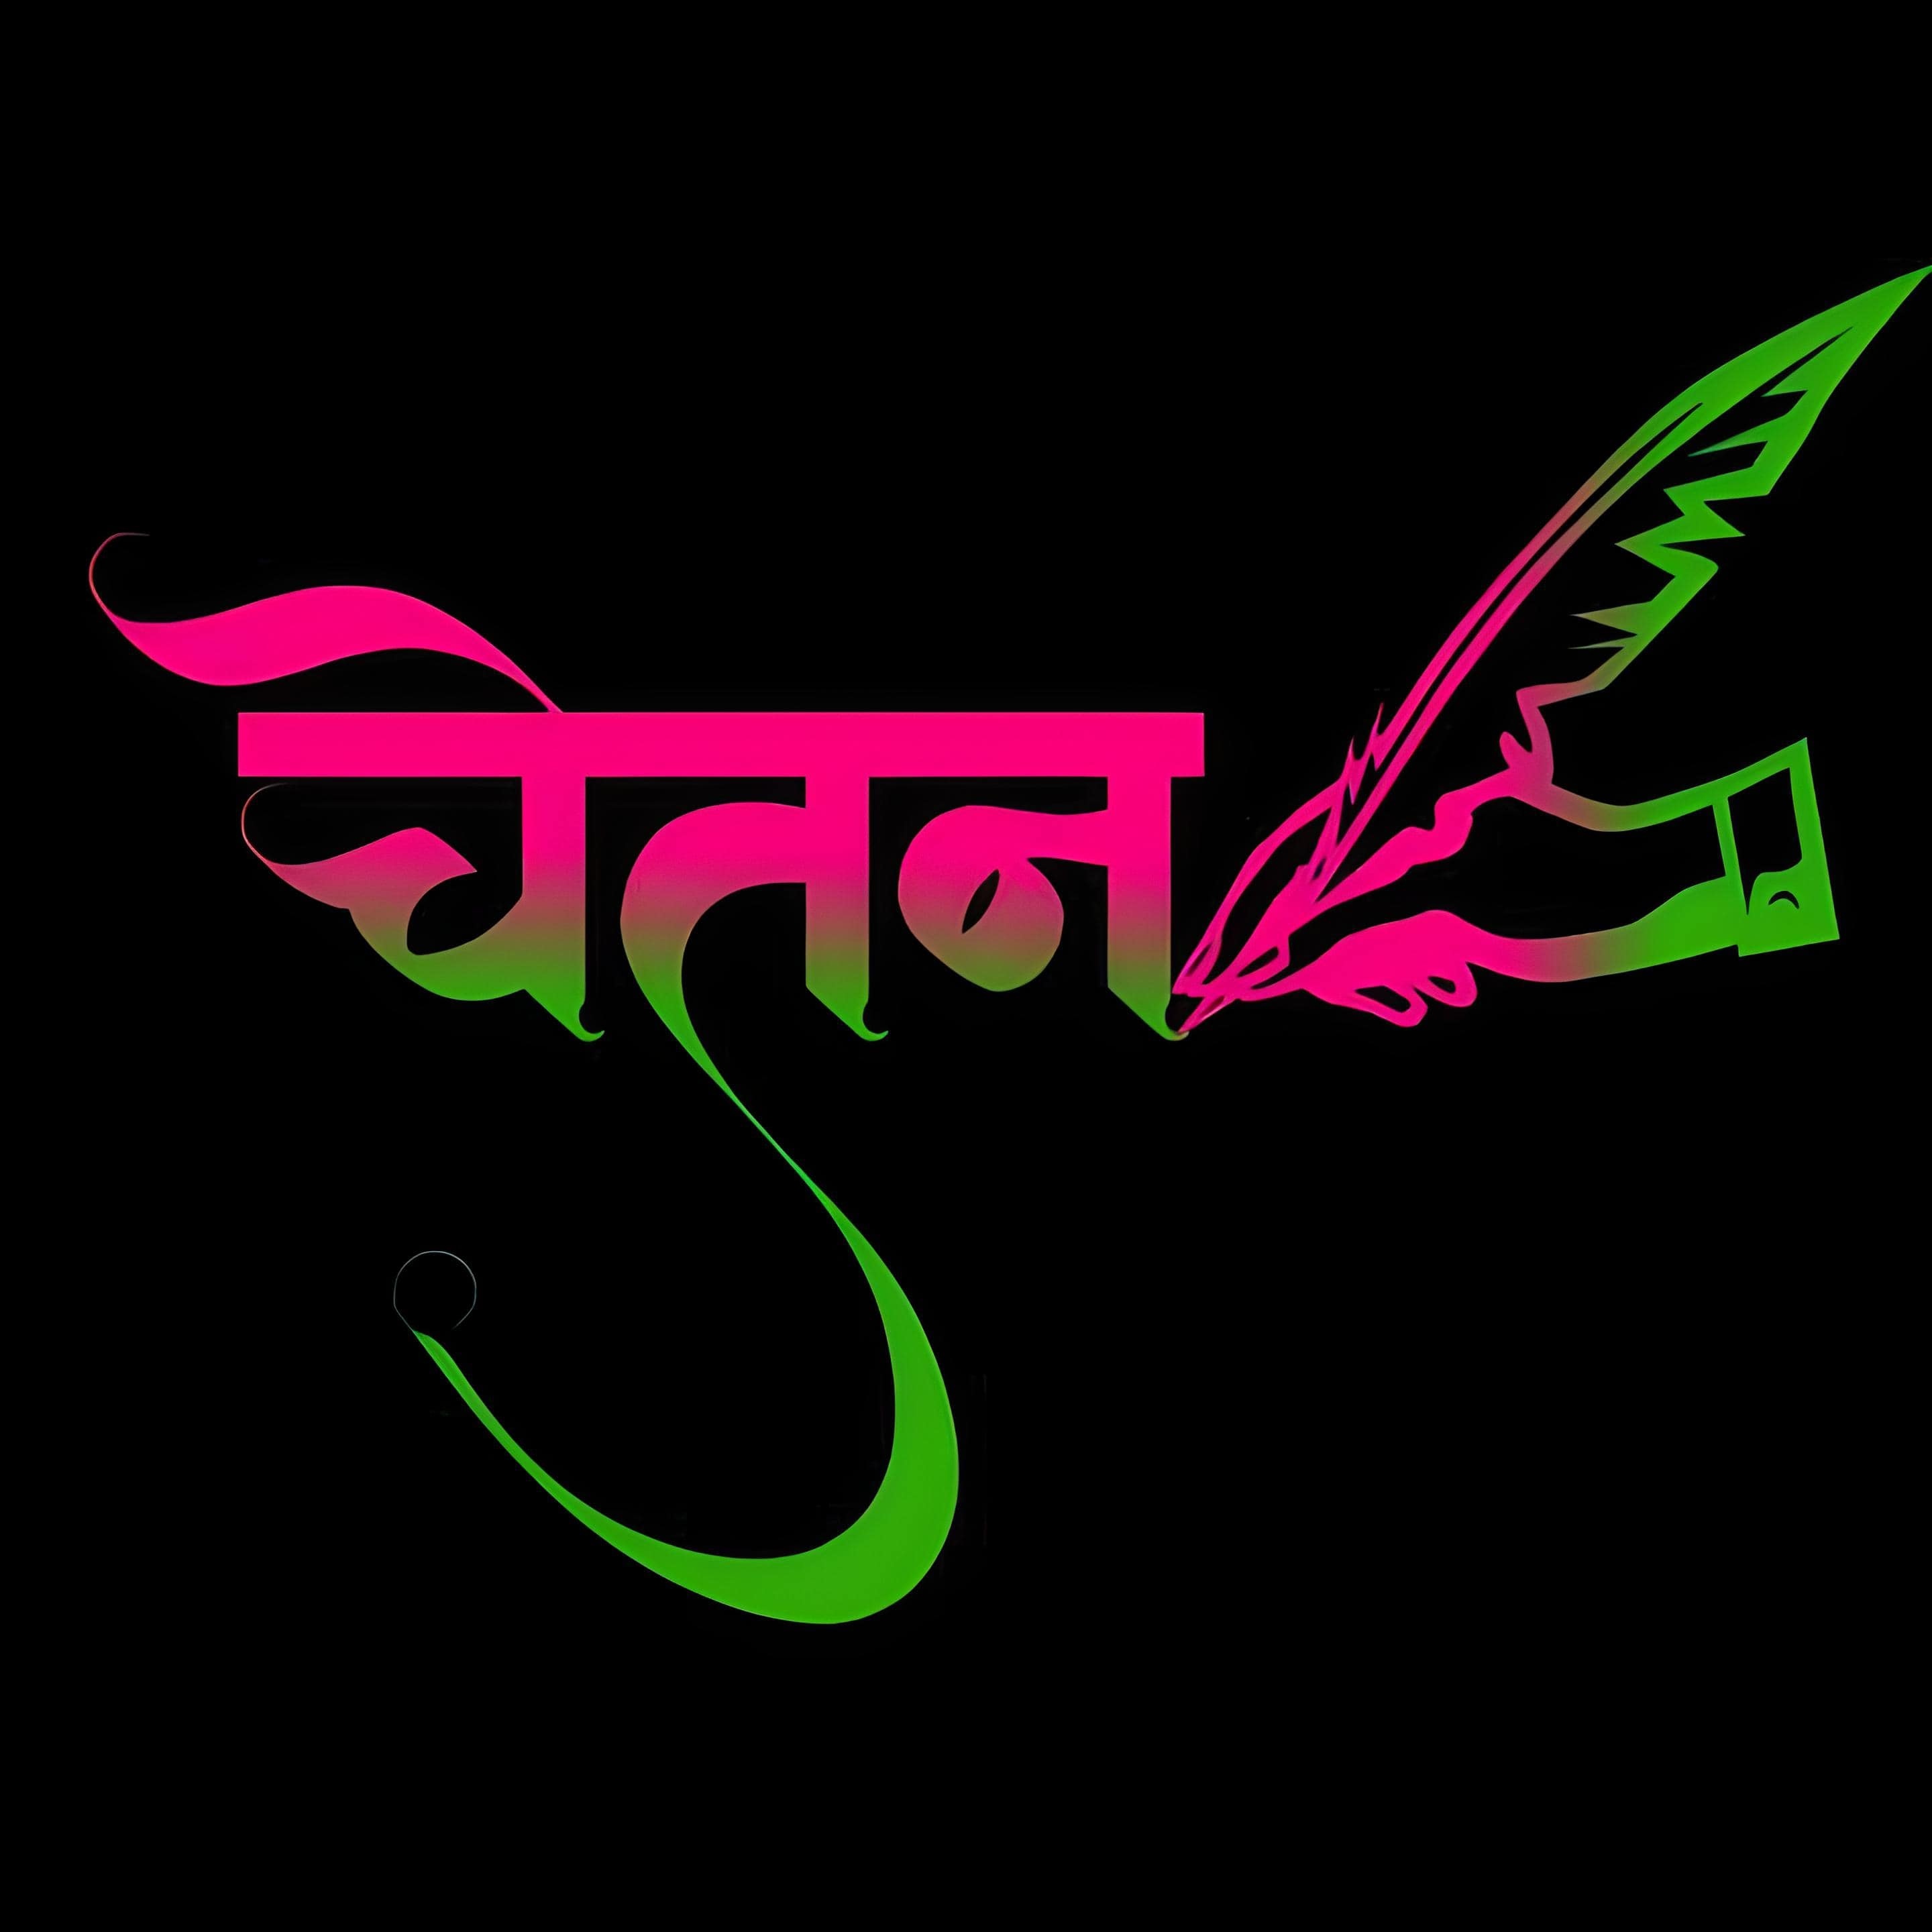 A To Z Name - Chetan - Pink And Green Design